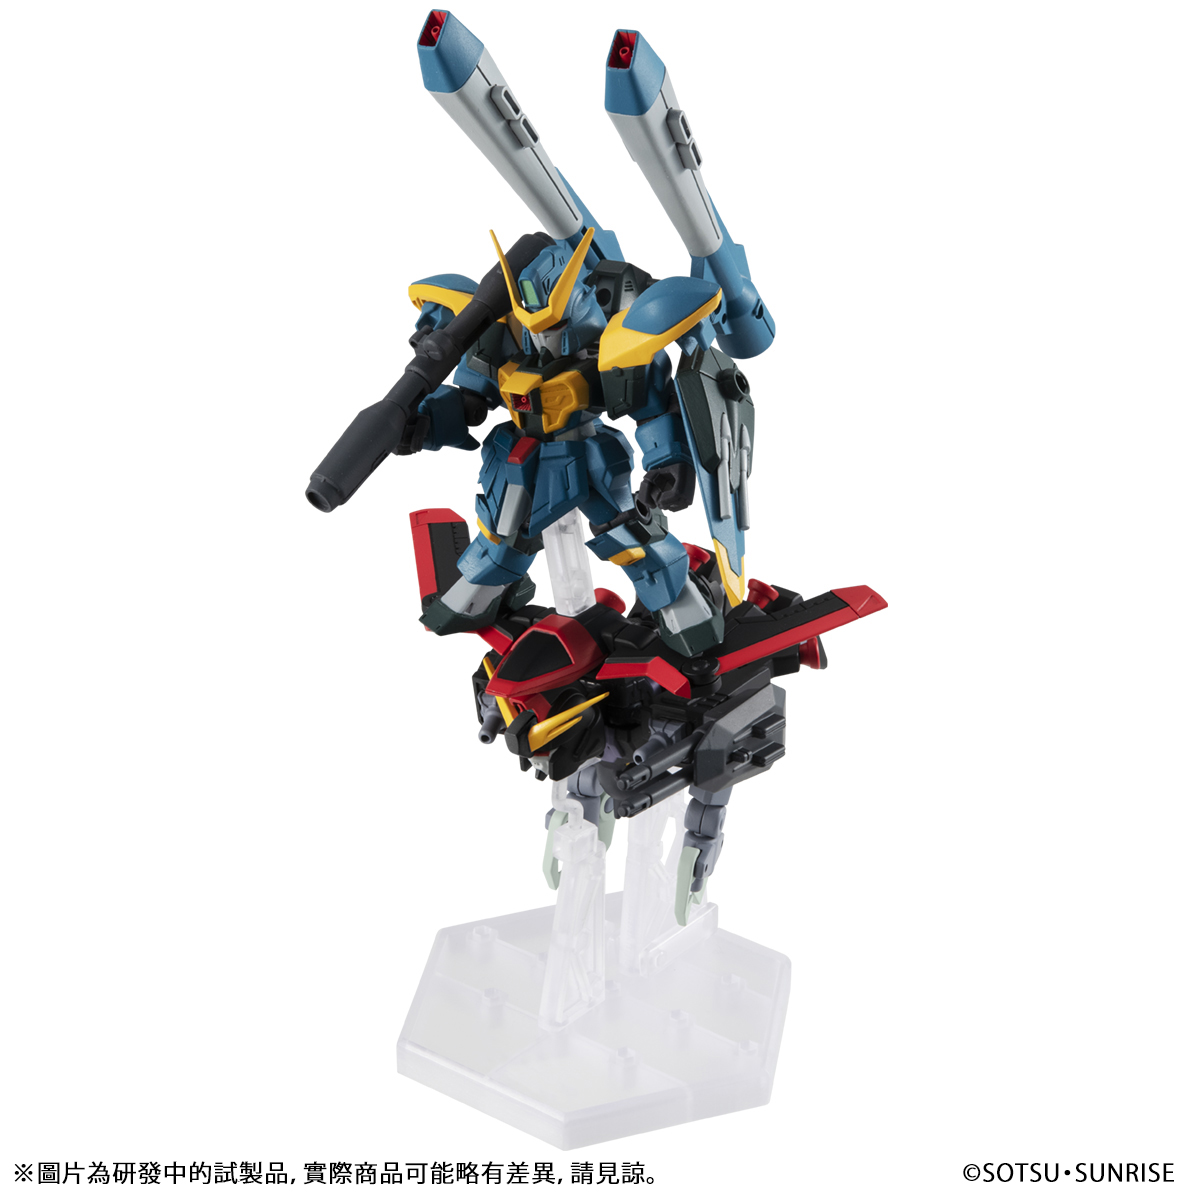 MOBILE SUIT ENSEMBLE EX30 EARTH ALLIANCE THE BOOSTED MAN SET